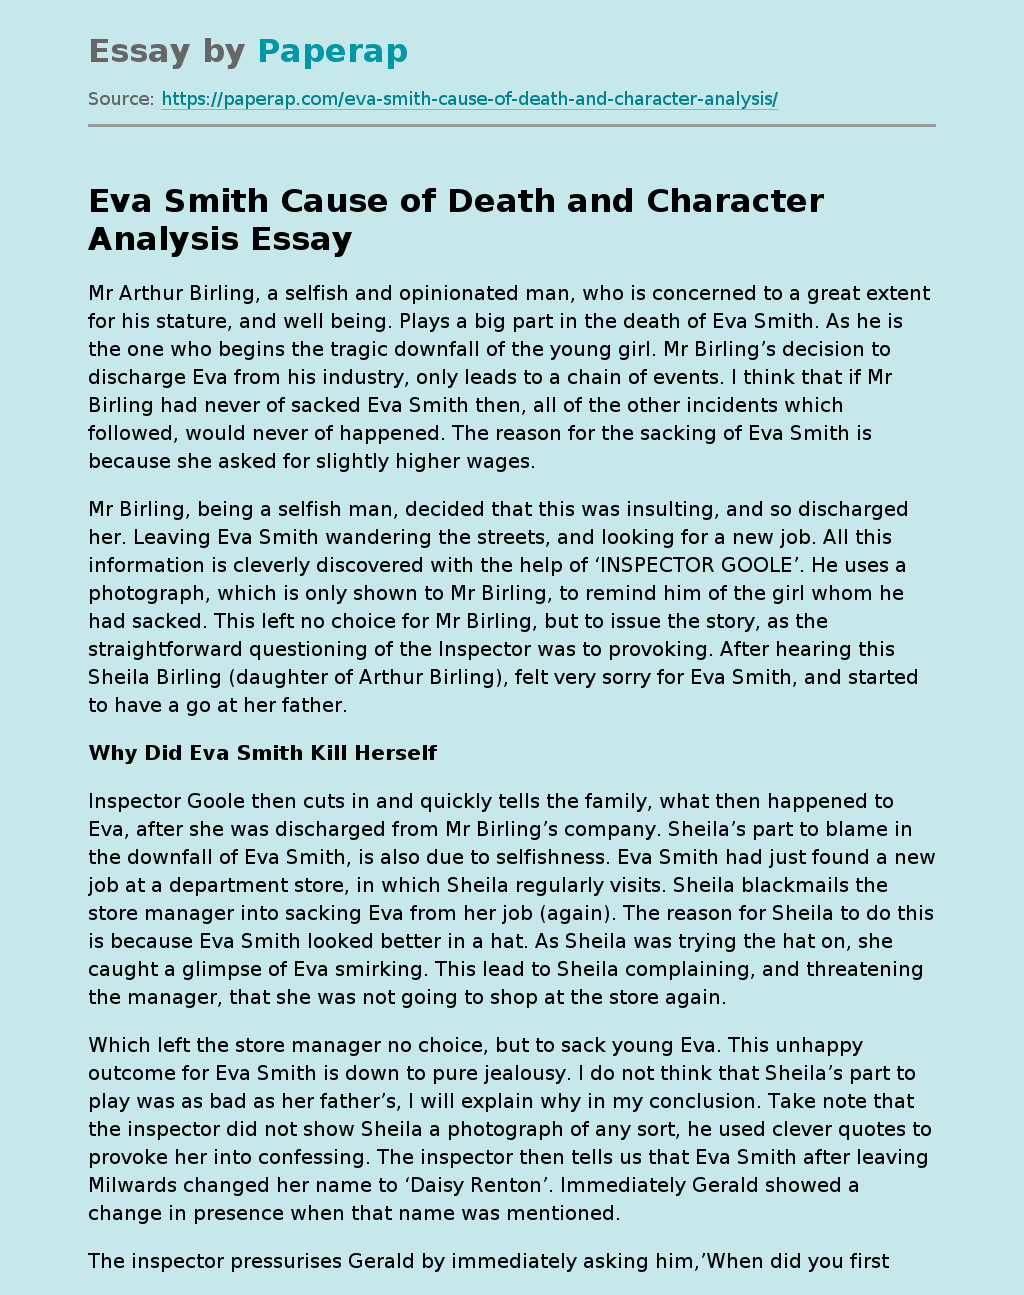 Eva Smith Cause of Death and Character Analysis